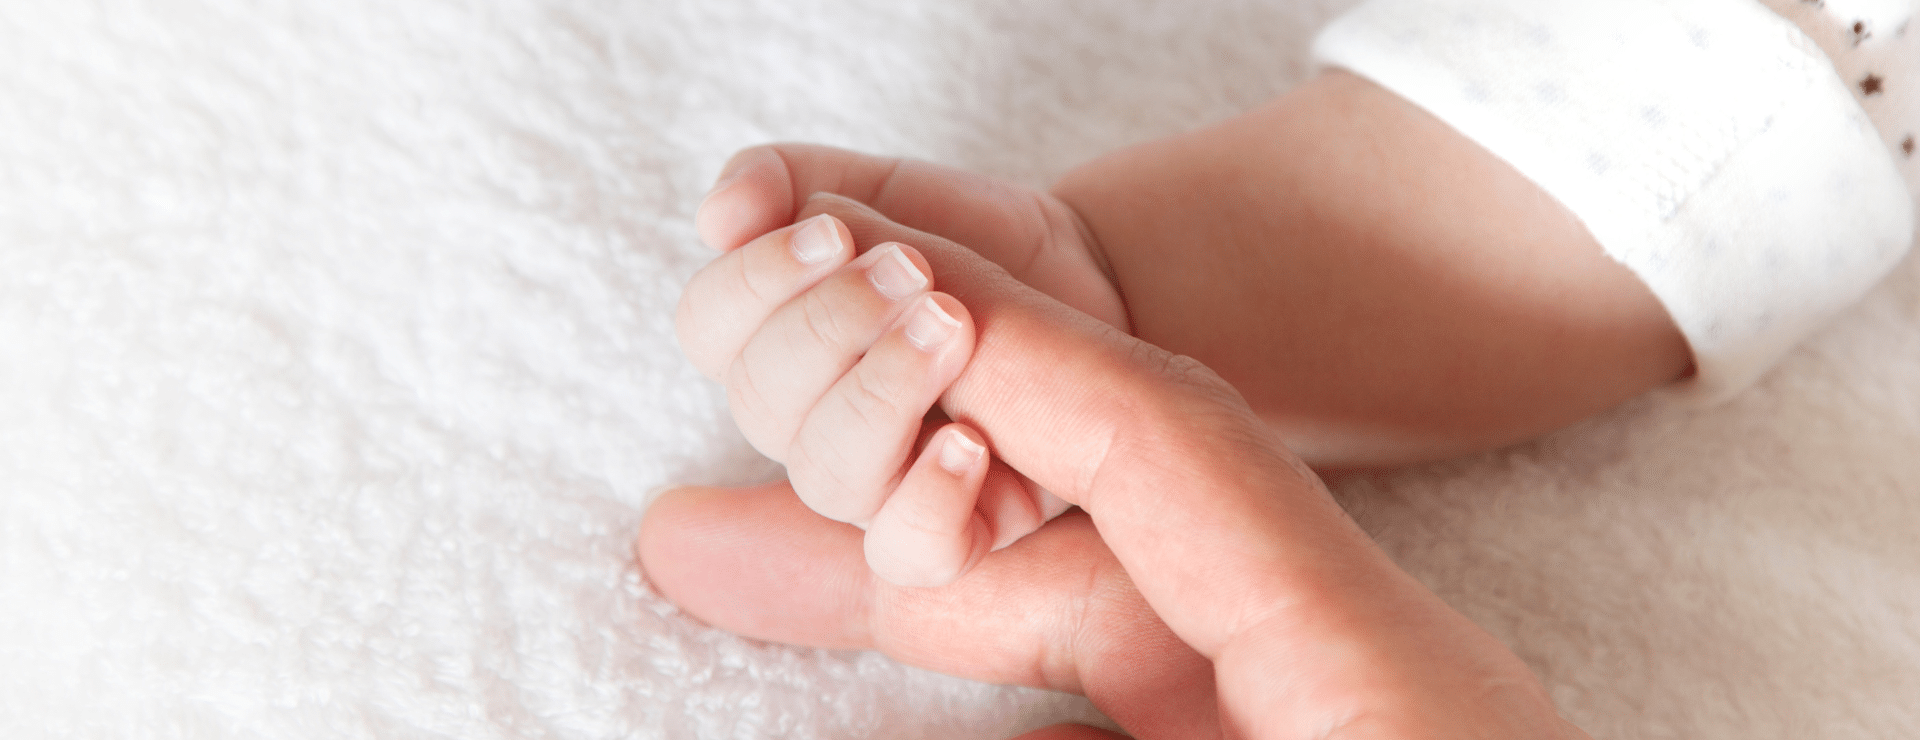 baby holding mom's fingers - personal injury lawyers in st. louis, missouri